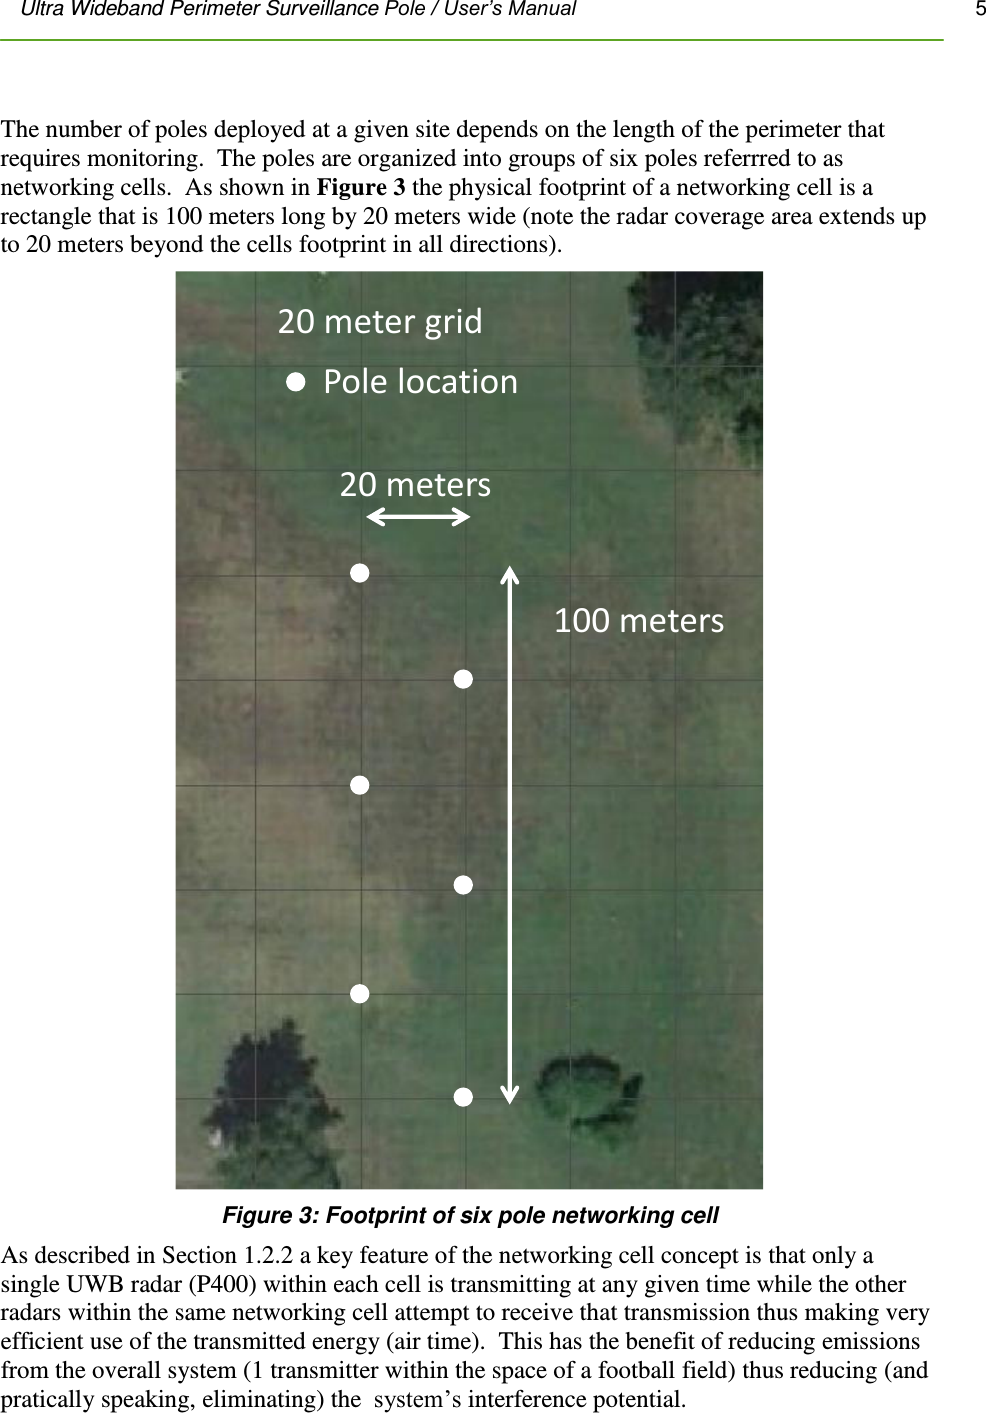 Ultra Wideband Perimeter Surveillance Pole / User’s Manual       5          The number of poles deployed at a given site depends on the length of the perimeter that requires monitoring.  The poles are organized into groups of six poles referrred to as networking cells.  As shown in Figure 3 the physical footprint of a networking cell is a rectangle that is 100 meters long by 20 meters wide (note the radar coverage area extends up to 20 meters beyond the cells footprint in all directions).    100 meters20 meters20 meter gridPole location Figure 3: Footprint of six pole networking cell As described in Section 1.2.2 a key feature of the networking cell concept is that only a single UWB radar (P400) within each cell is transmitting at any given time while the other radars within the same networking cell attempt to receive that transmission thus making very efficient use of the transmitted energy (air time).  This has the benefit of reducing emissions from the overall system (1 transmitter within the space of a football field) thus reducing (and pratically speaking, eliminating) the  system’s interference potential. 